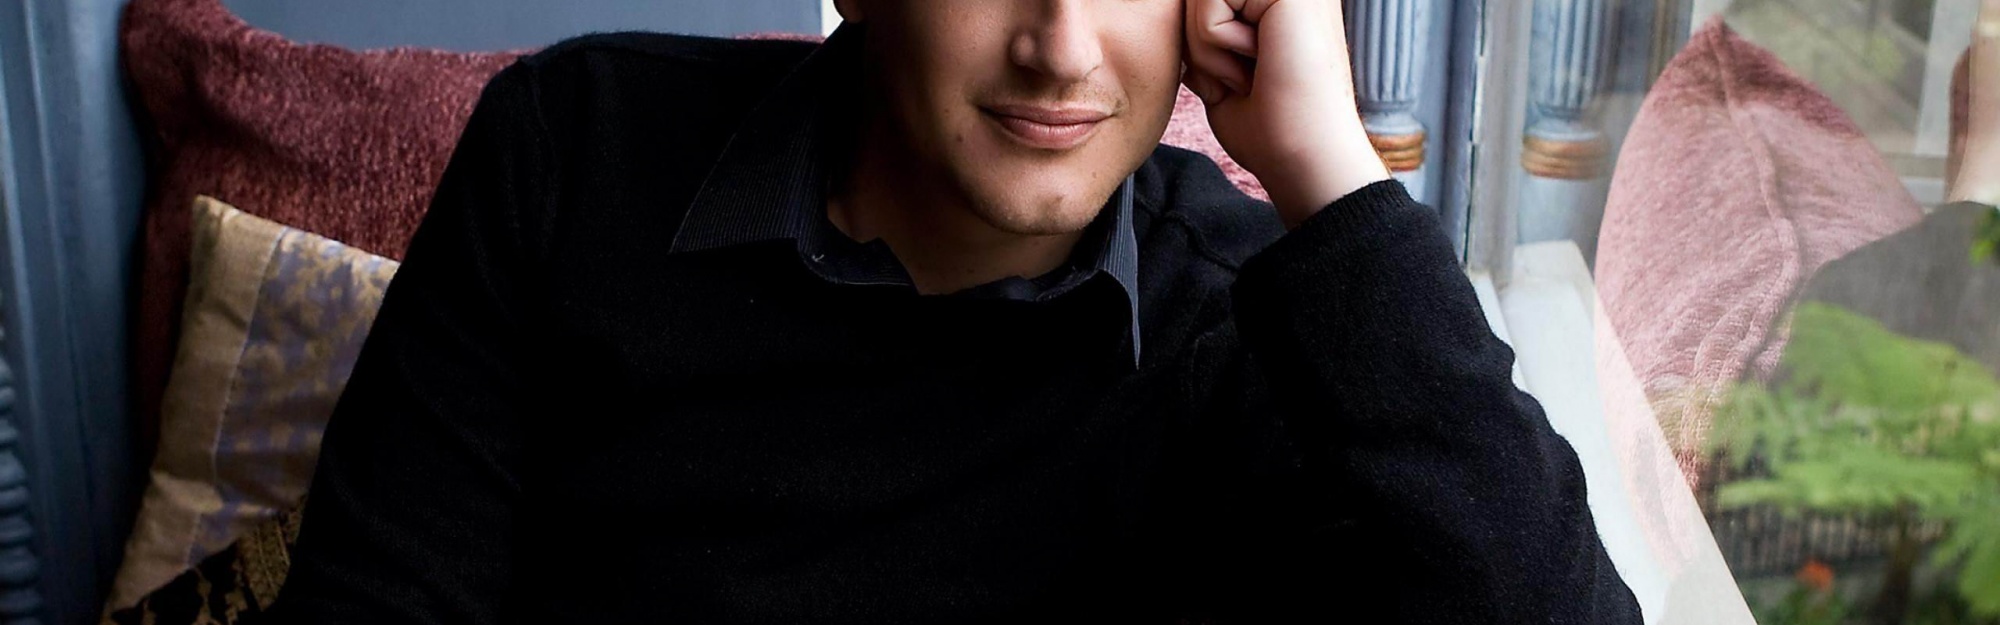 Jason Segel The American Film And Television Actor